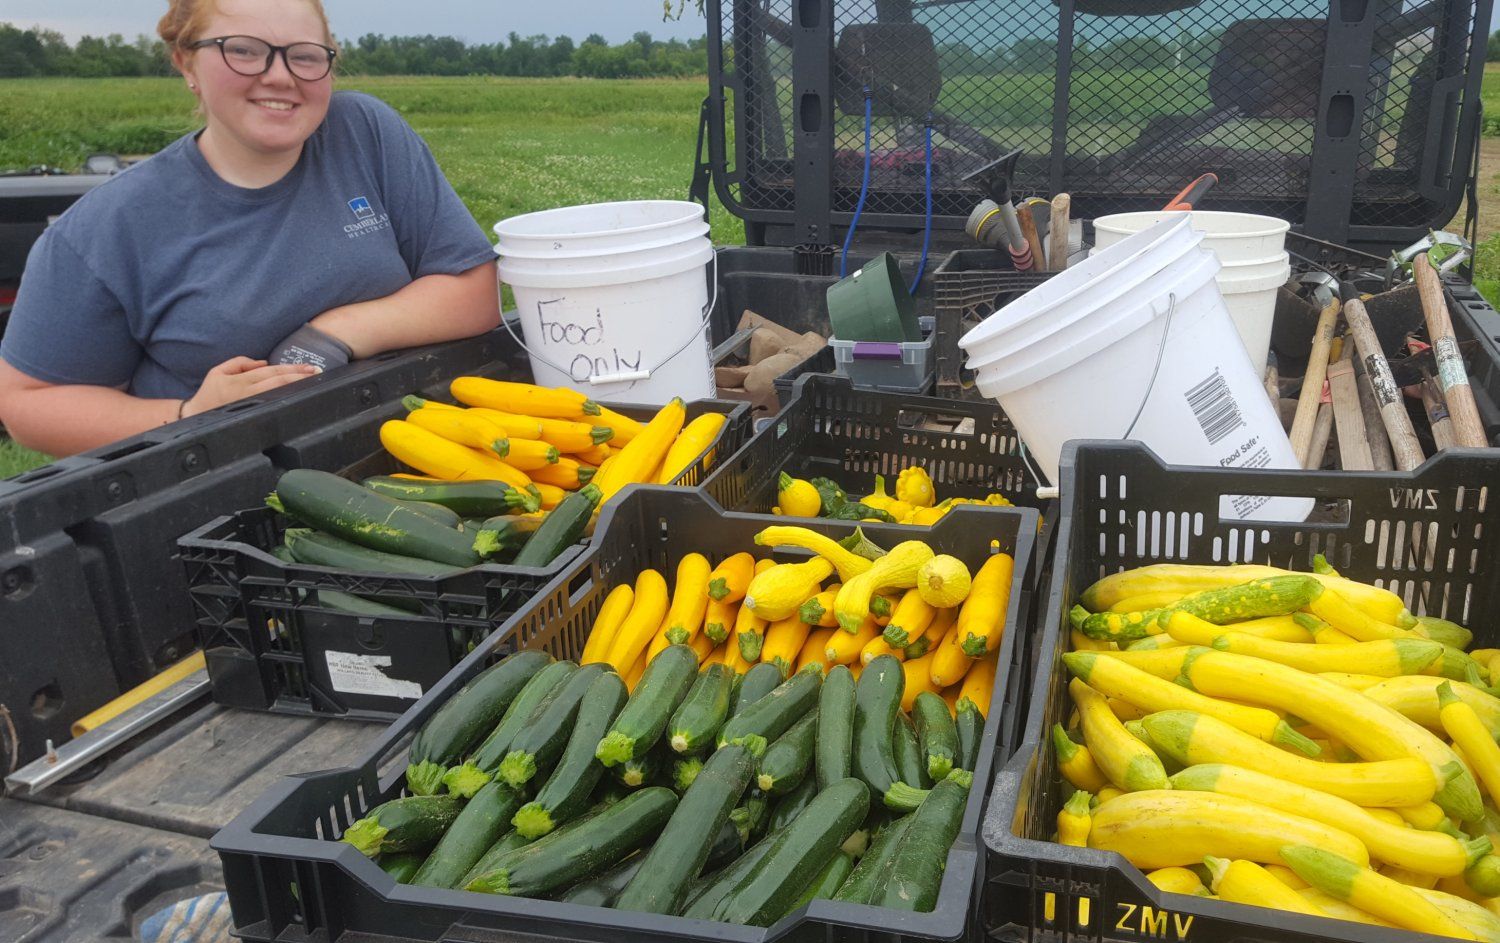 Previous Happening: Farm Share for July 27-28, 2022